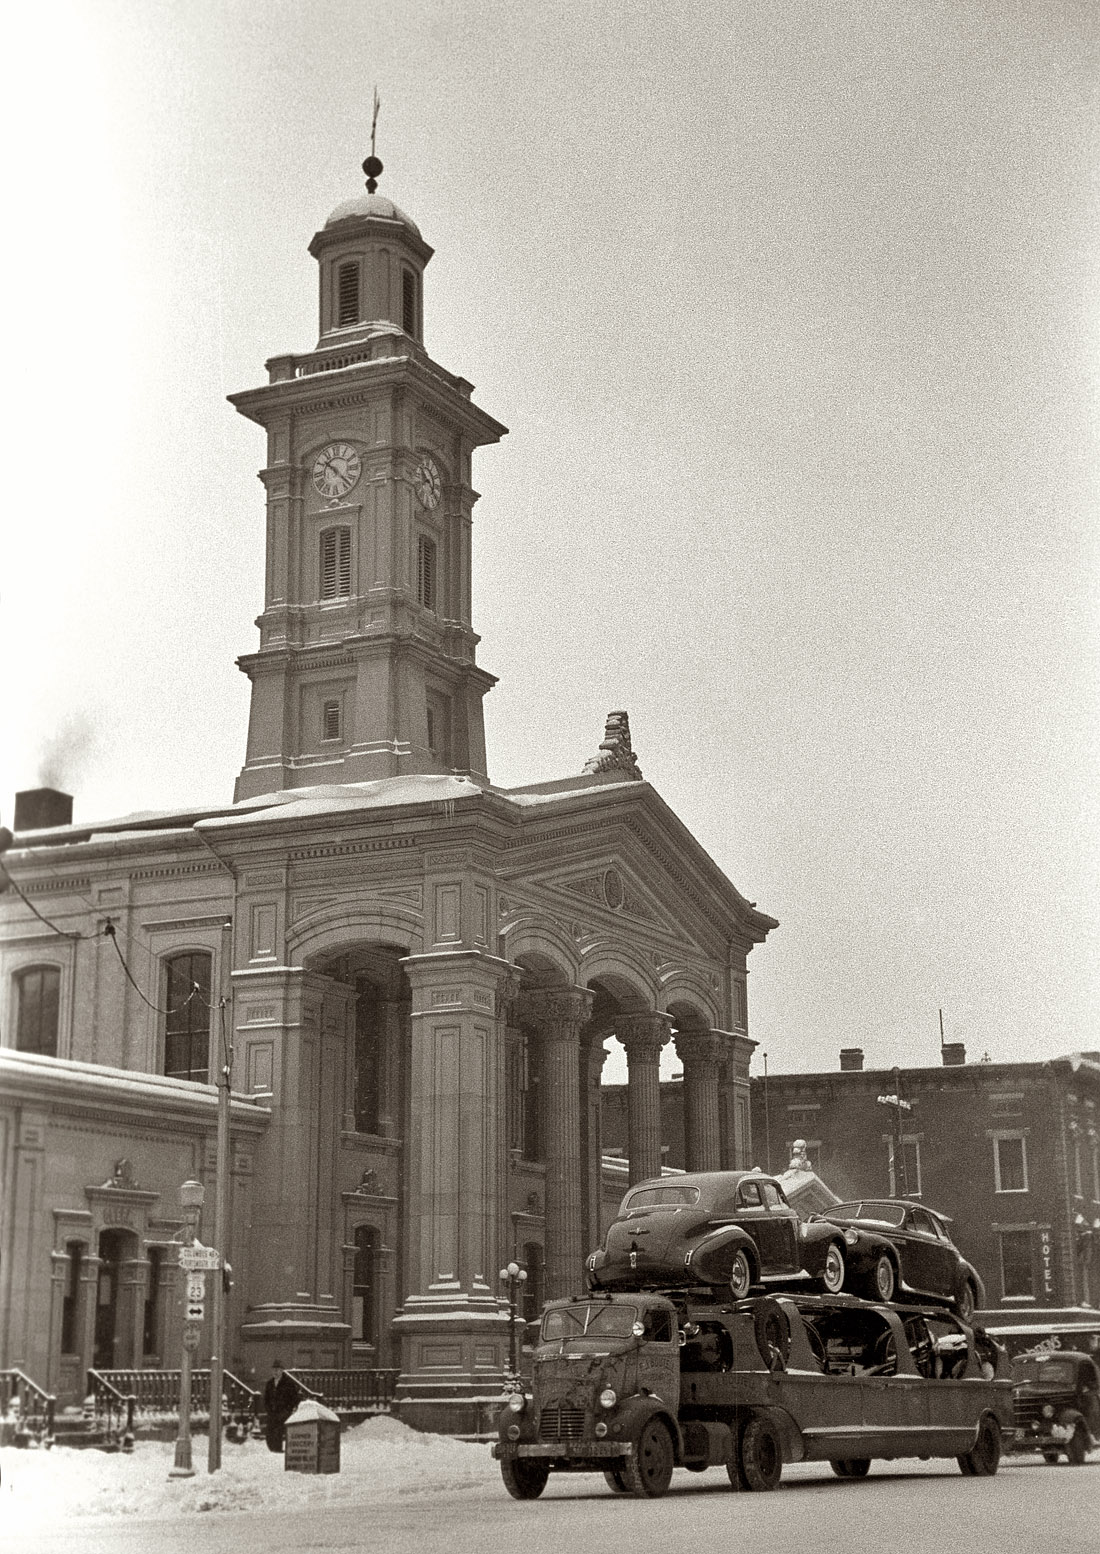 February 1940. Courthouse and auto transport hauling Buicks in Chillicothe, Ohio. View full size. 35mm nitrate negative by Arthur Rothstein for the FSA.